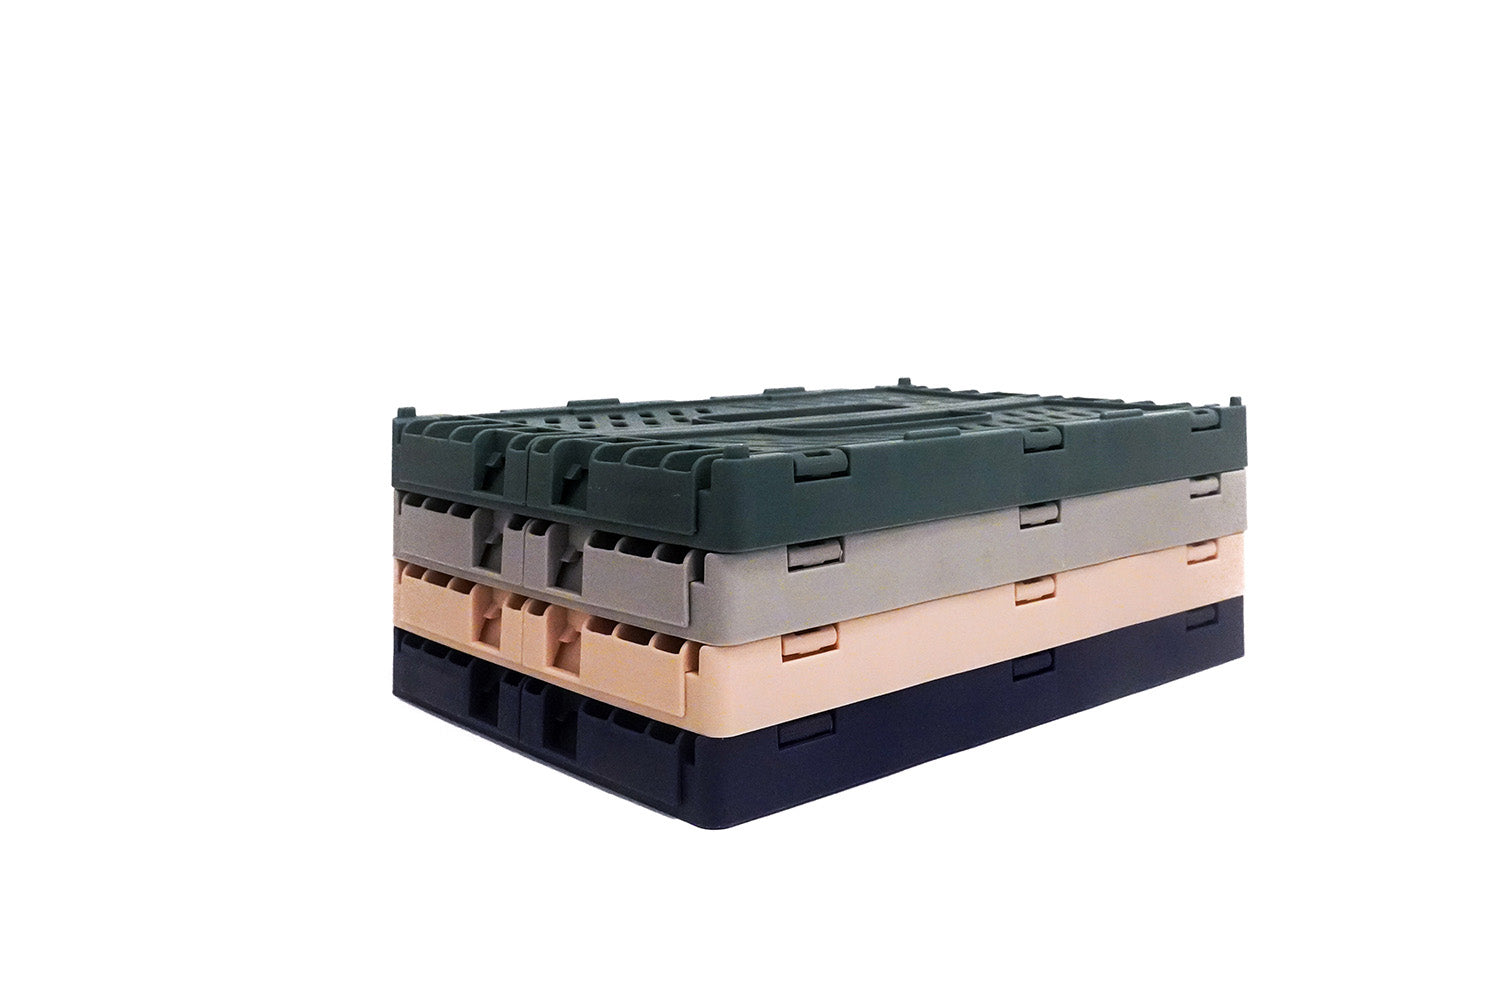 Small collapsed foldable storage crates in four colours